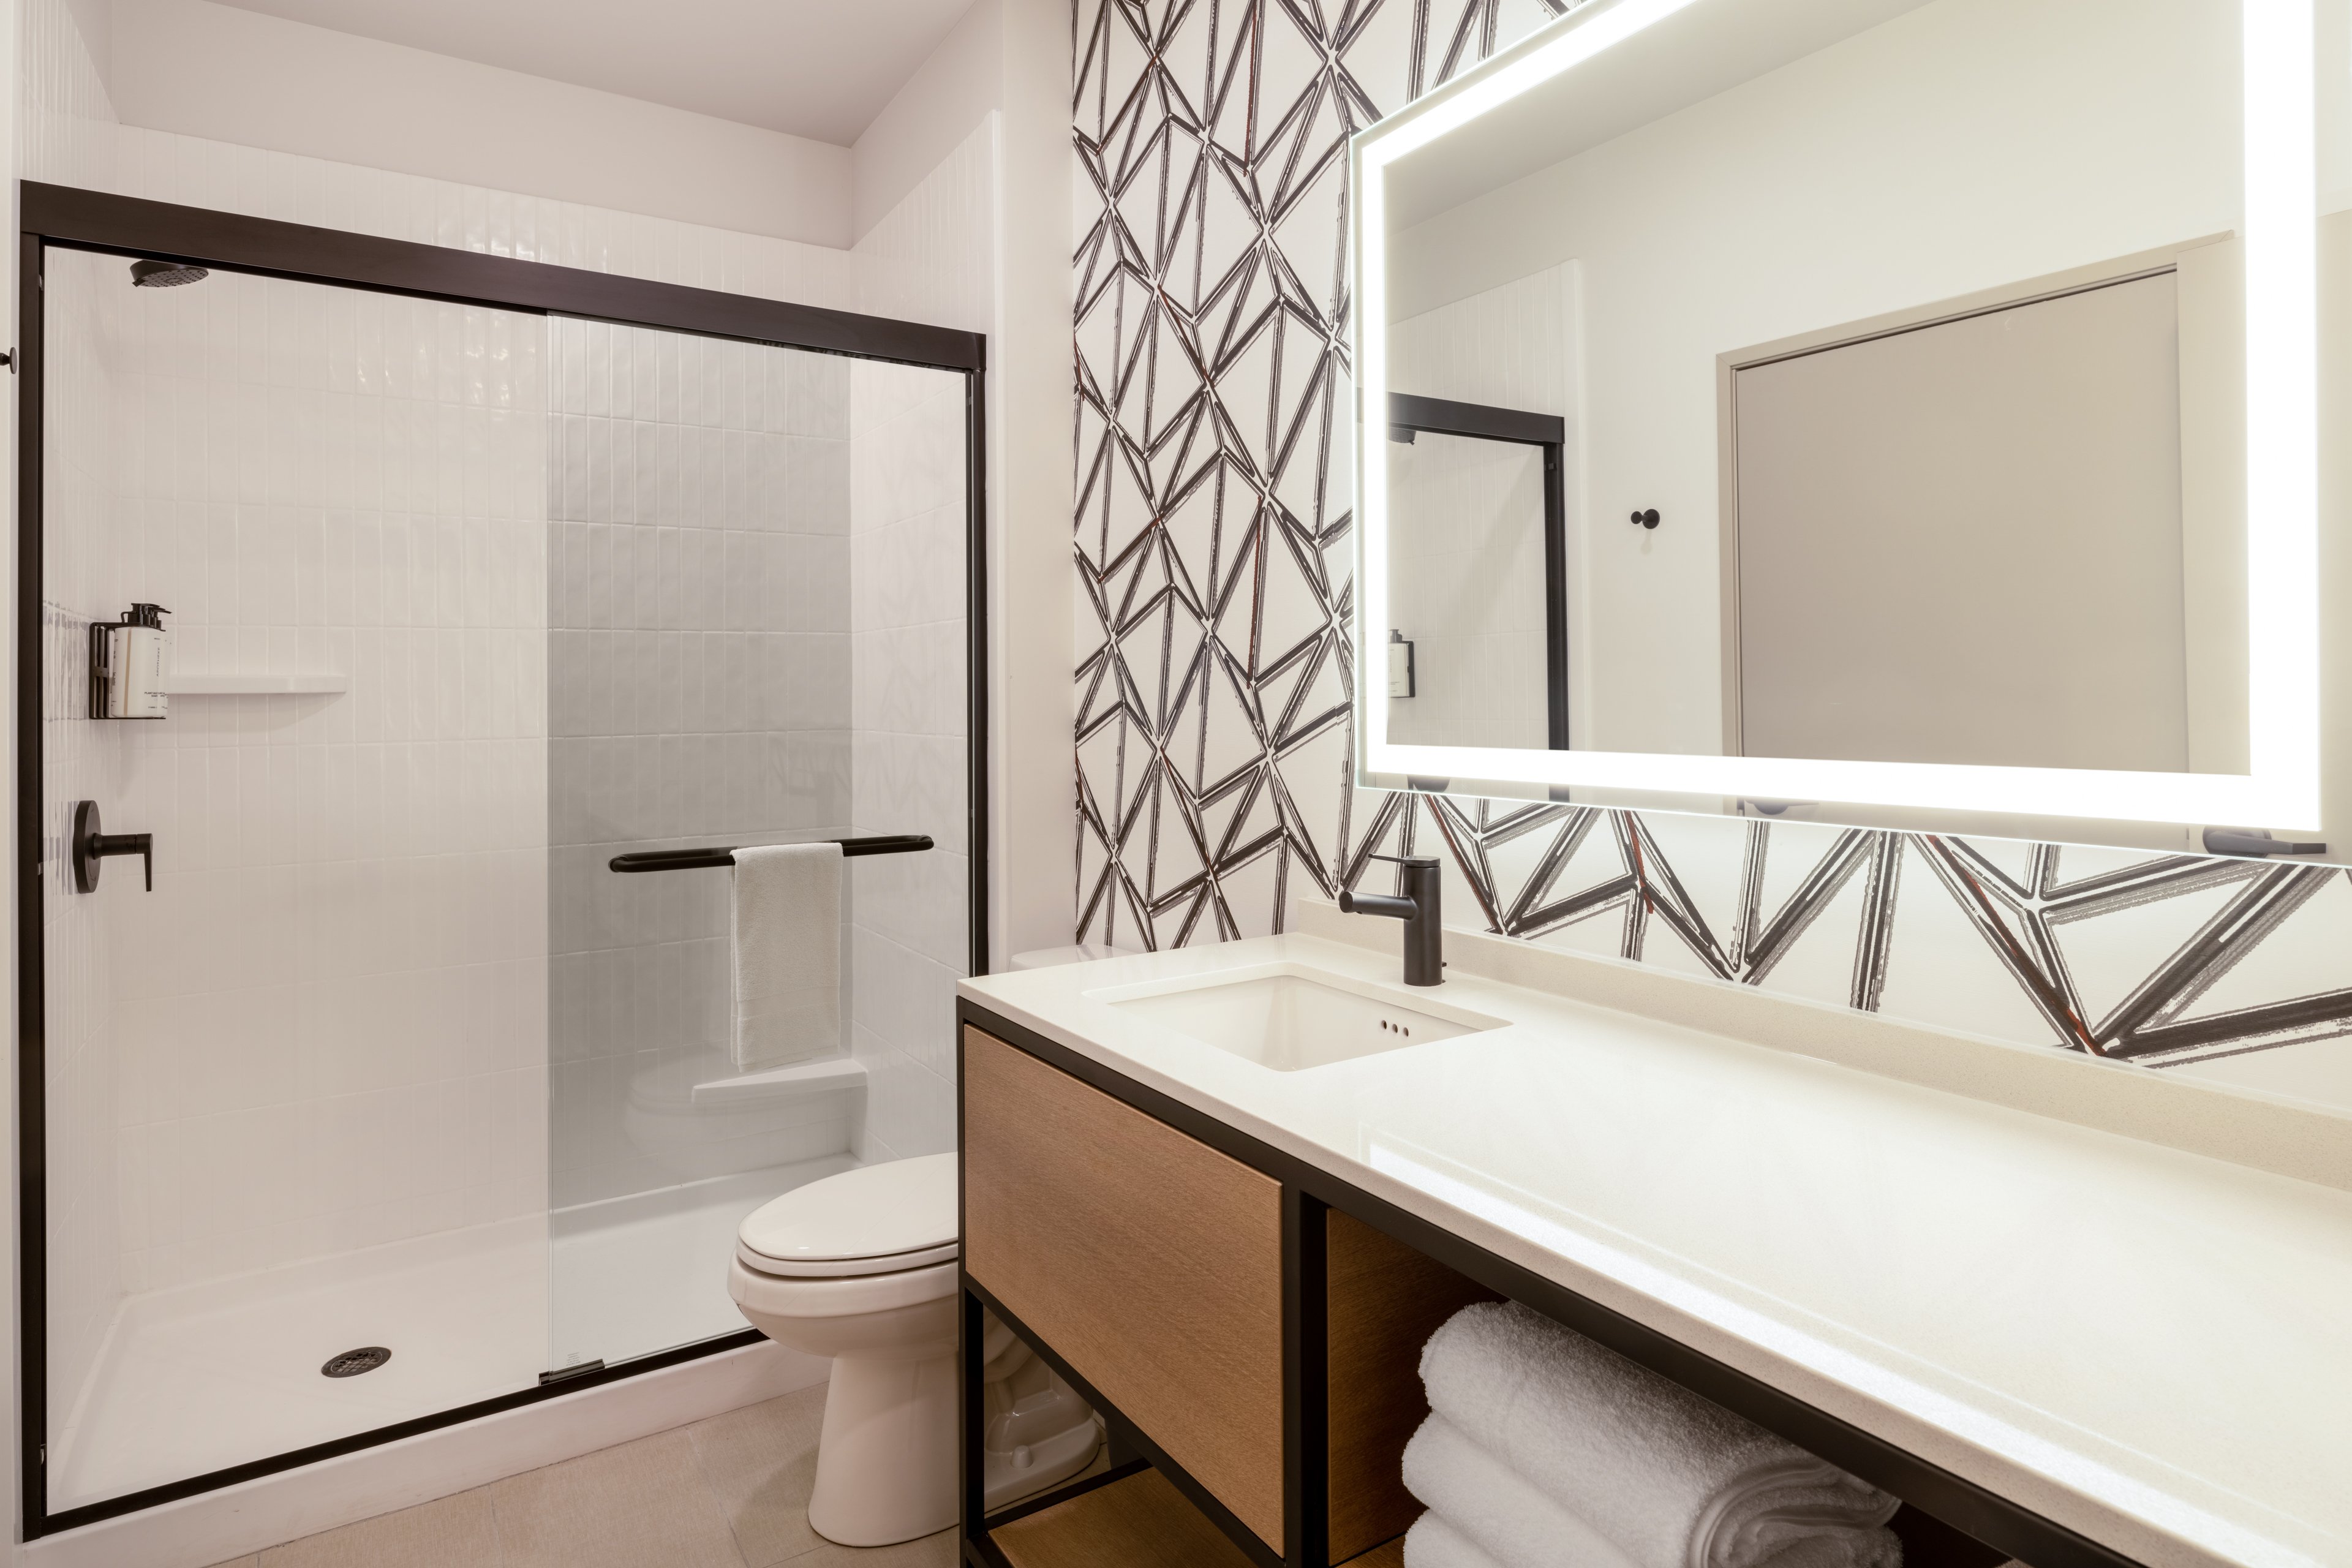 Guest bathrooms feature modern design and amenities